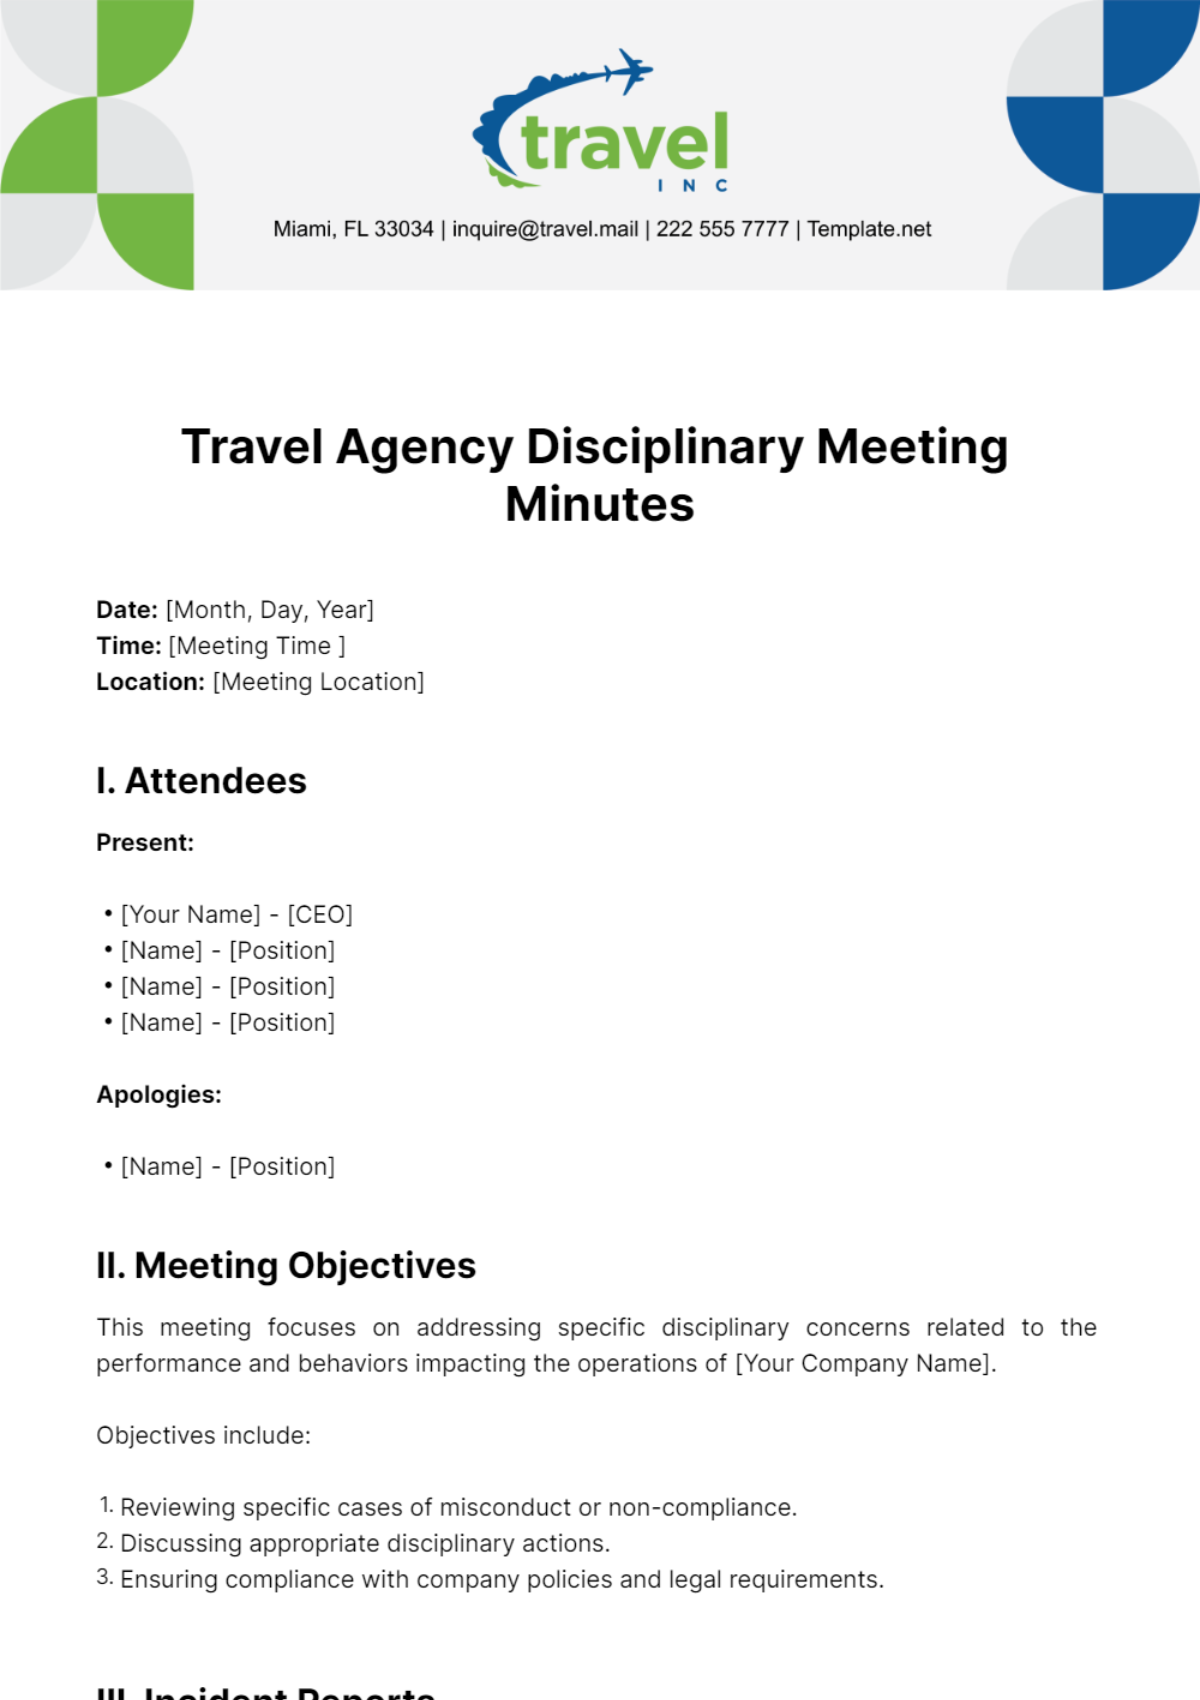 Free Travel Agency Disciplinary Meeting Minutes Template